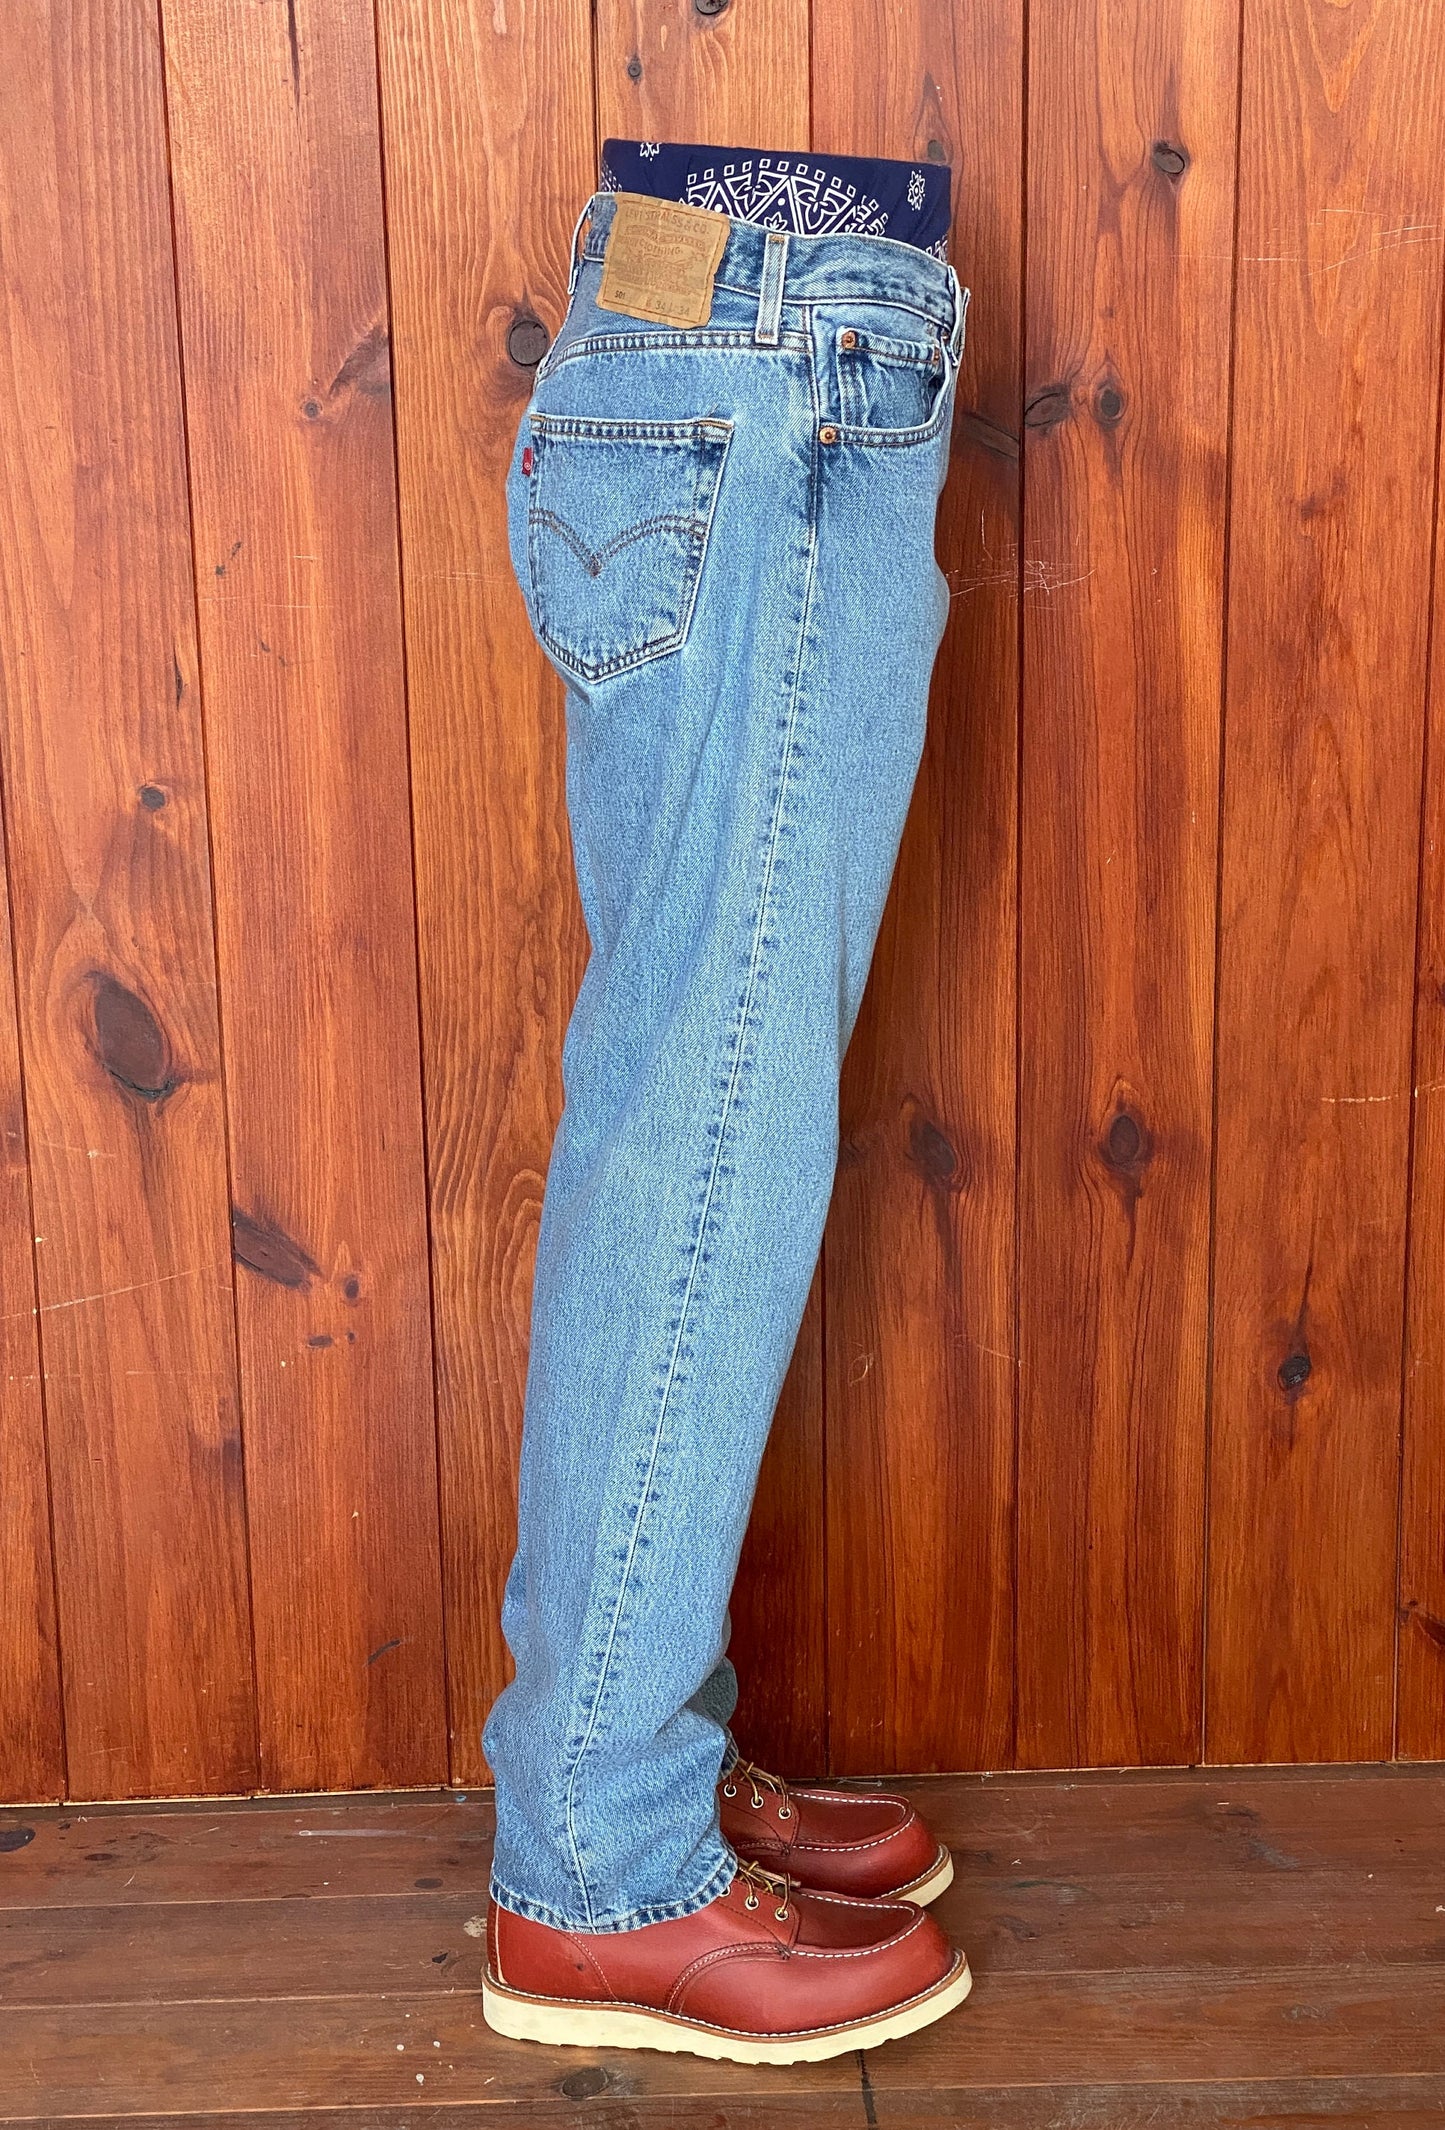 Levi's 501 Vintage Jeans Made In Mexico - Size 34x34